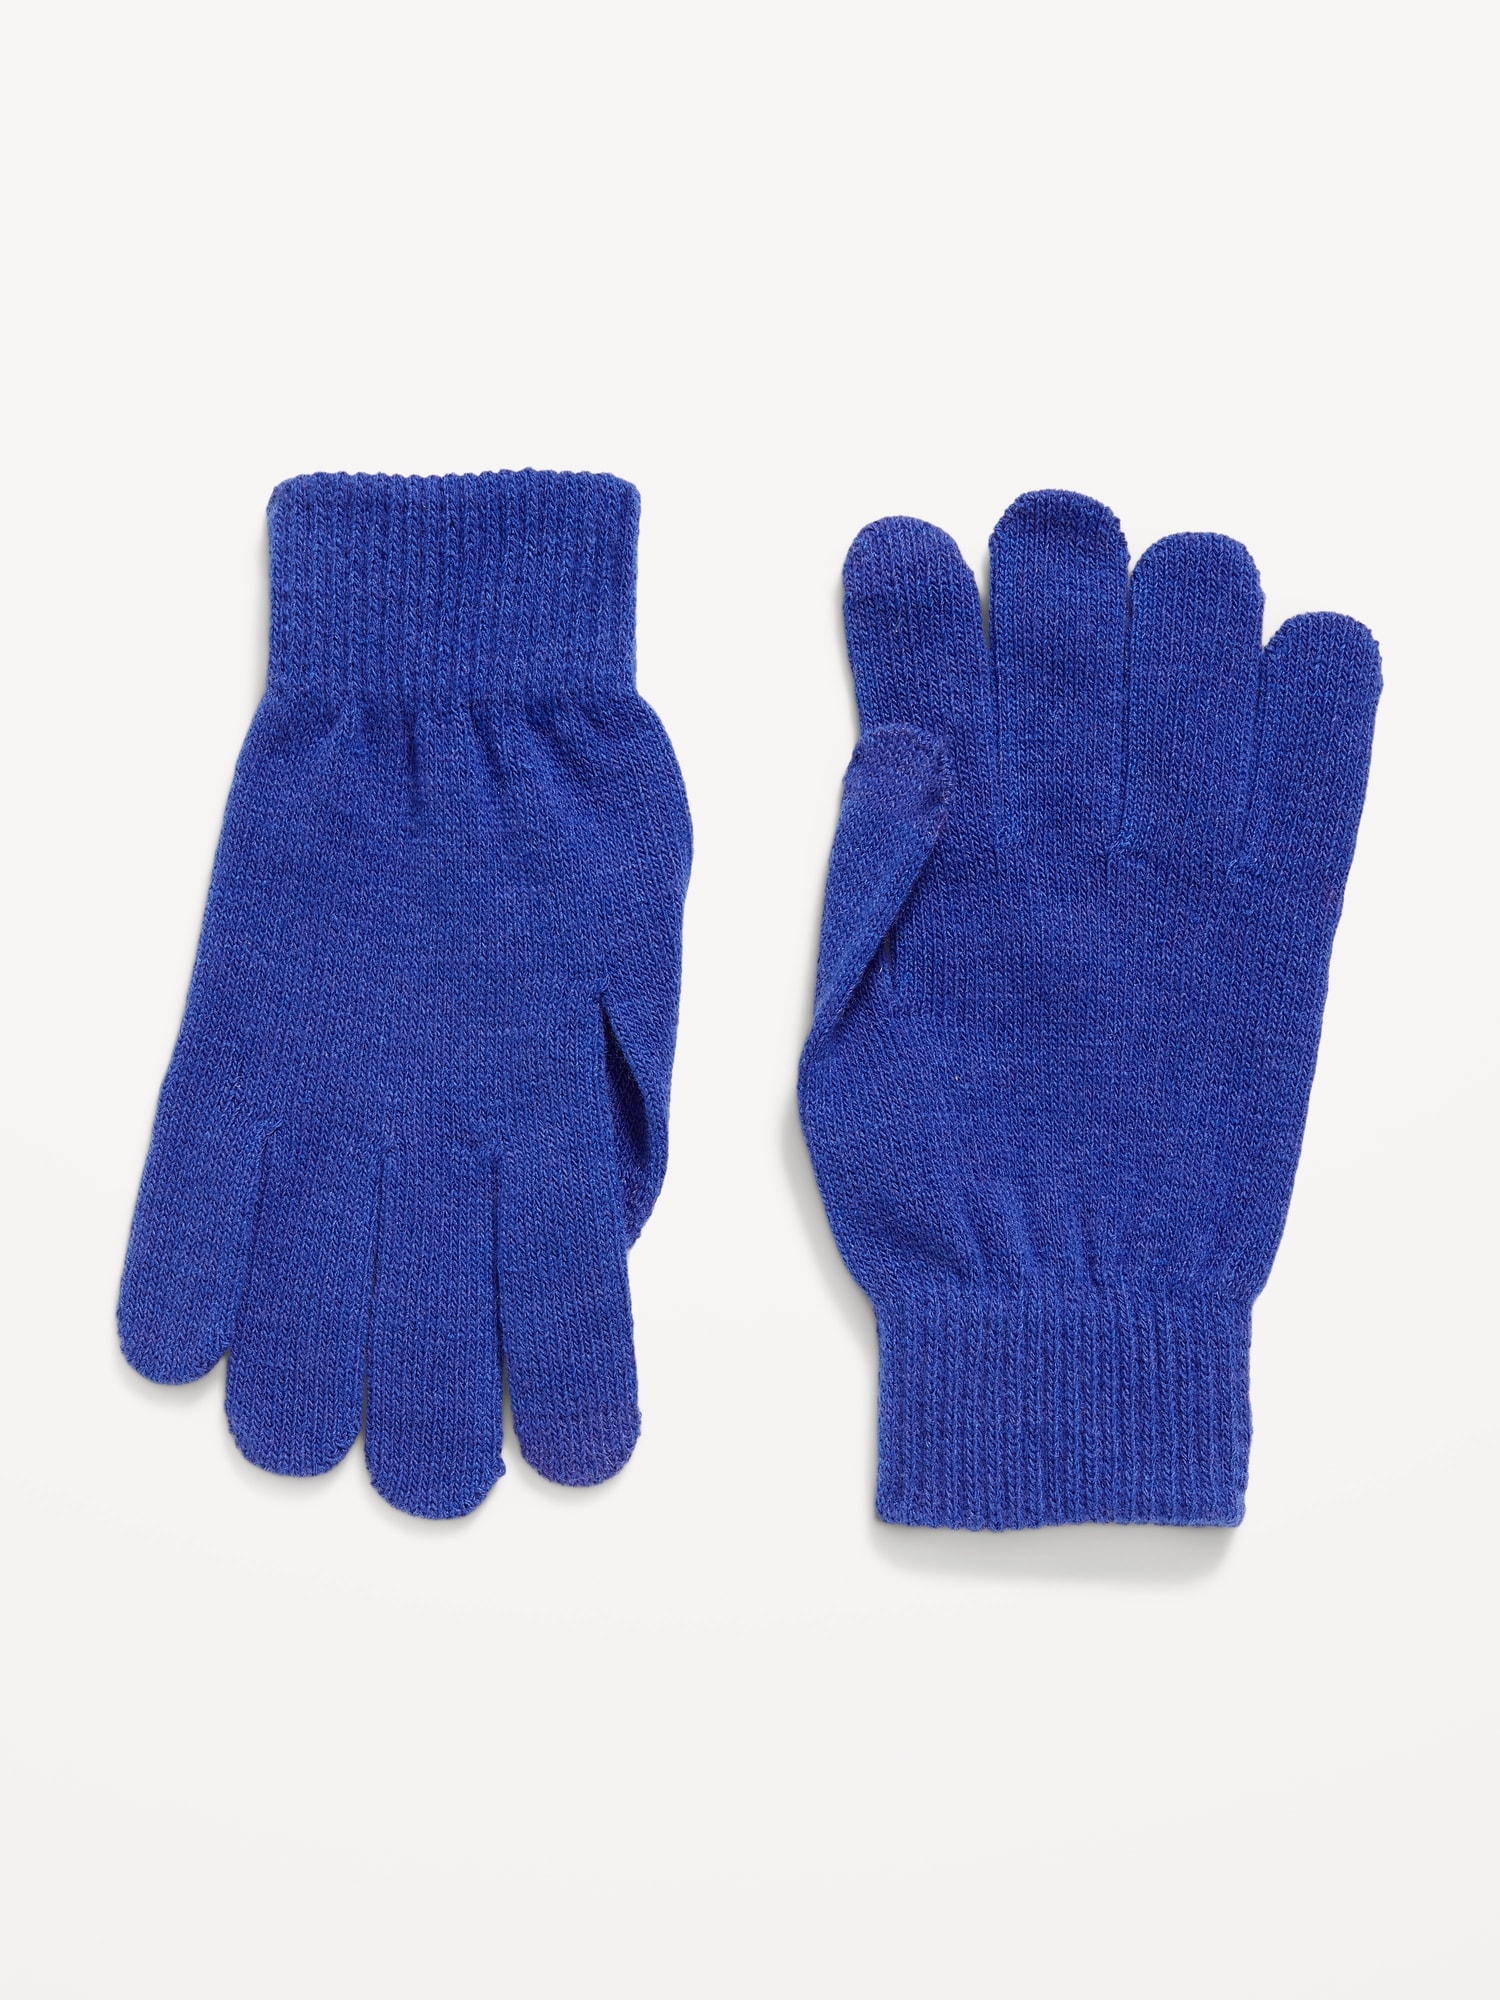 Text-Friendly Gloves for Women